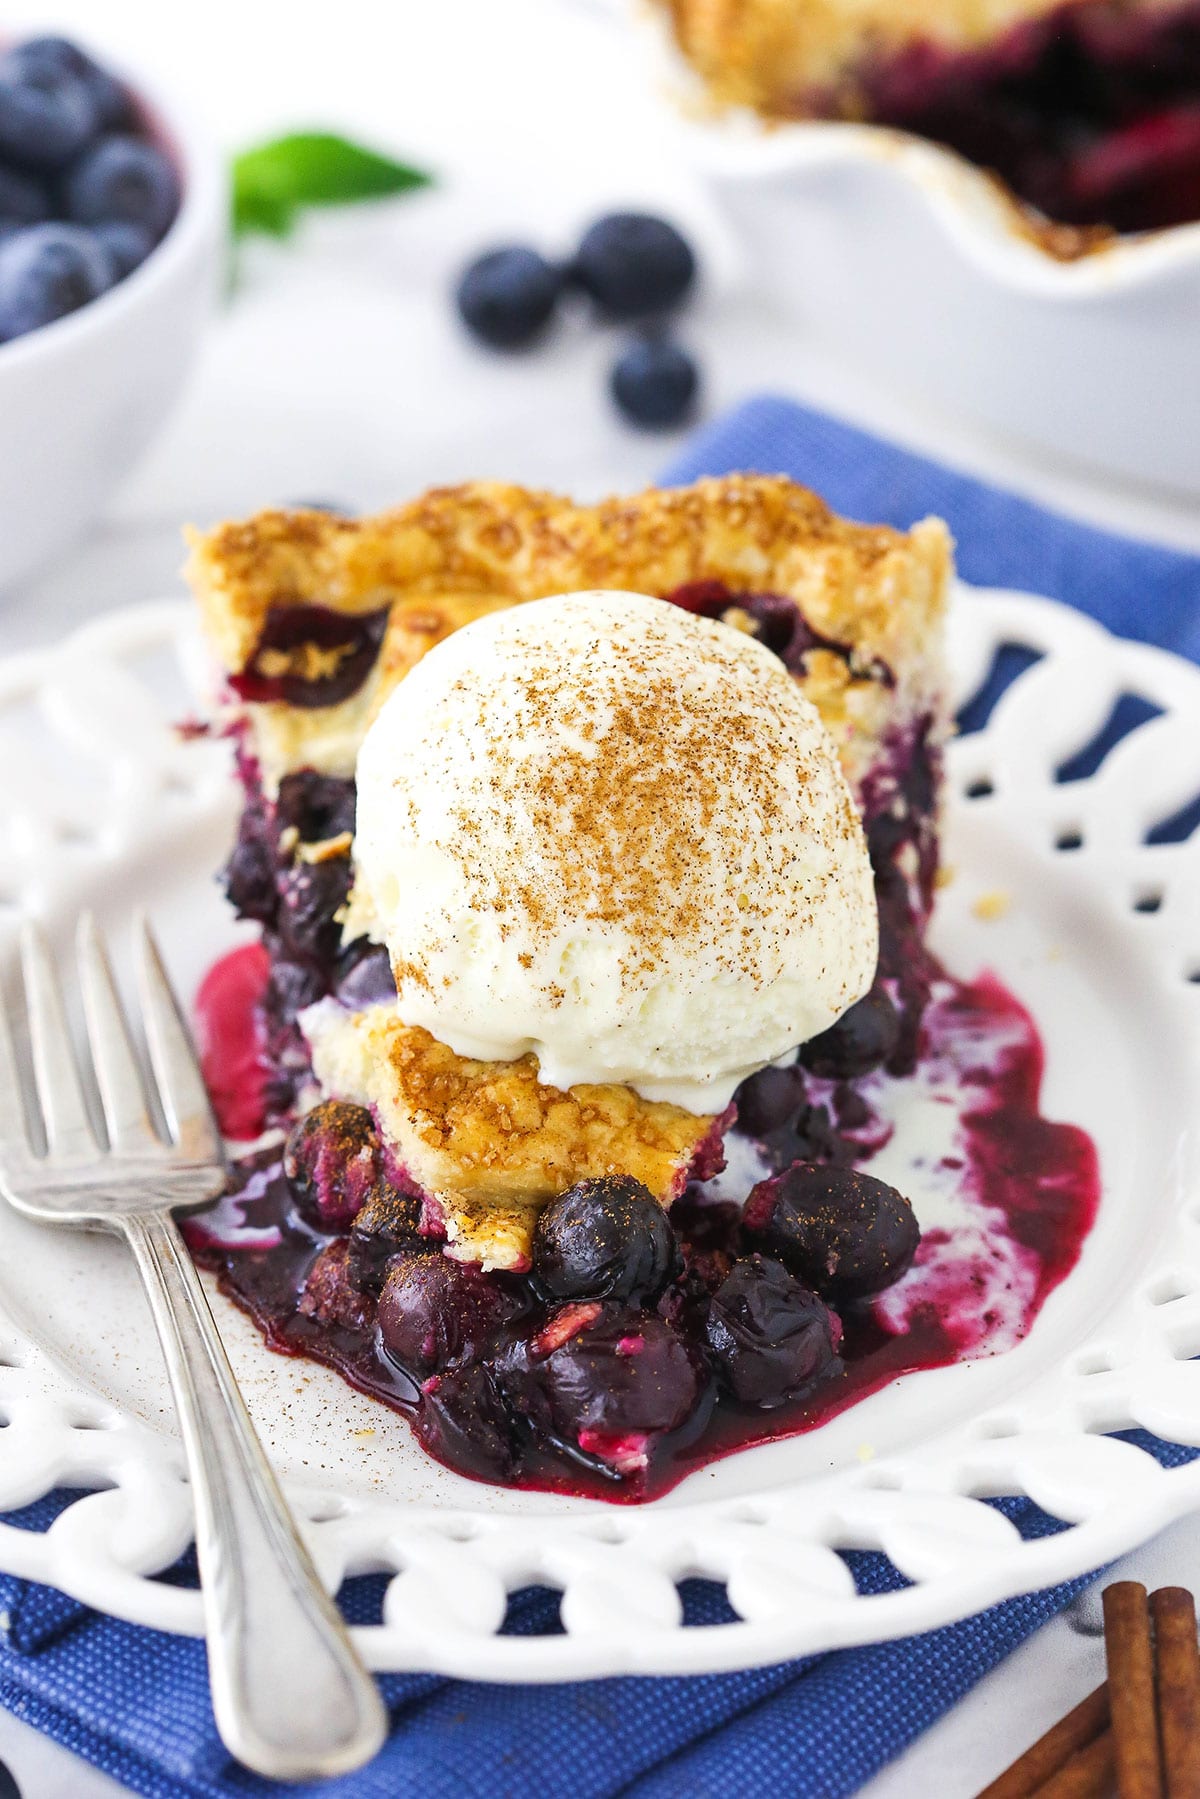 A slice of homemade blueberry pie topped with vanilla ice cream and ground cinnamon